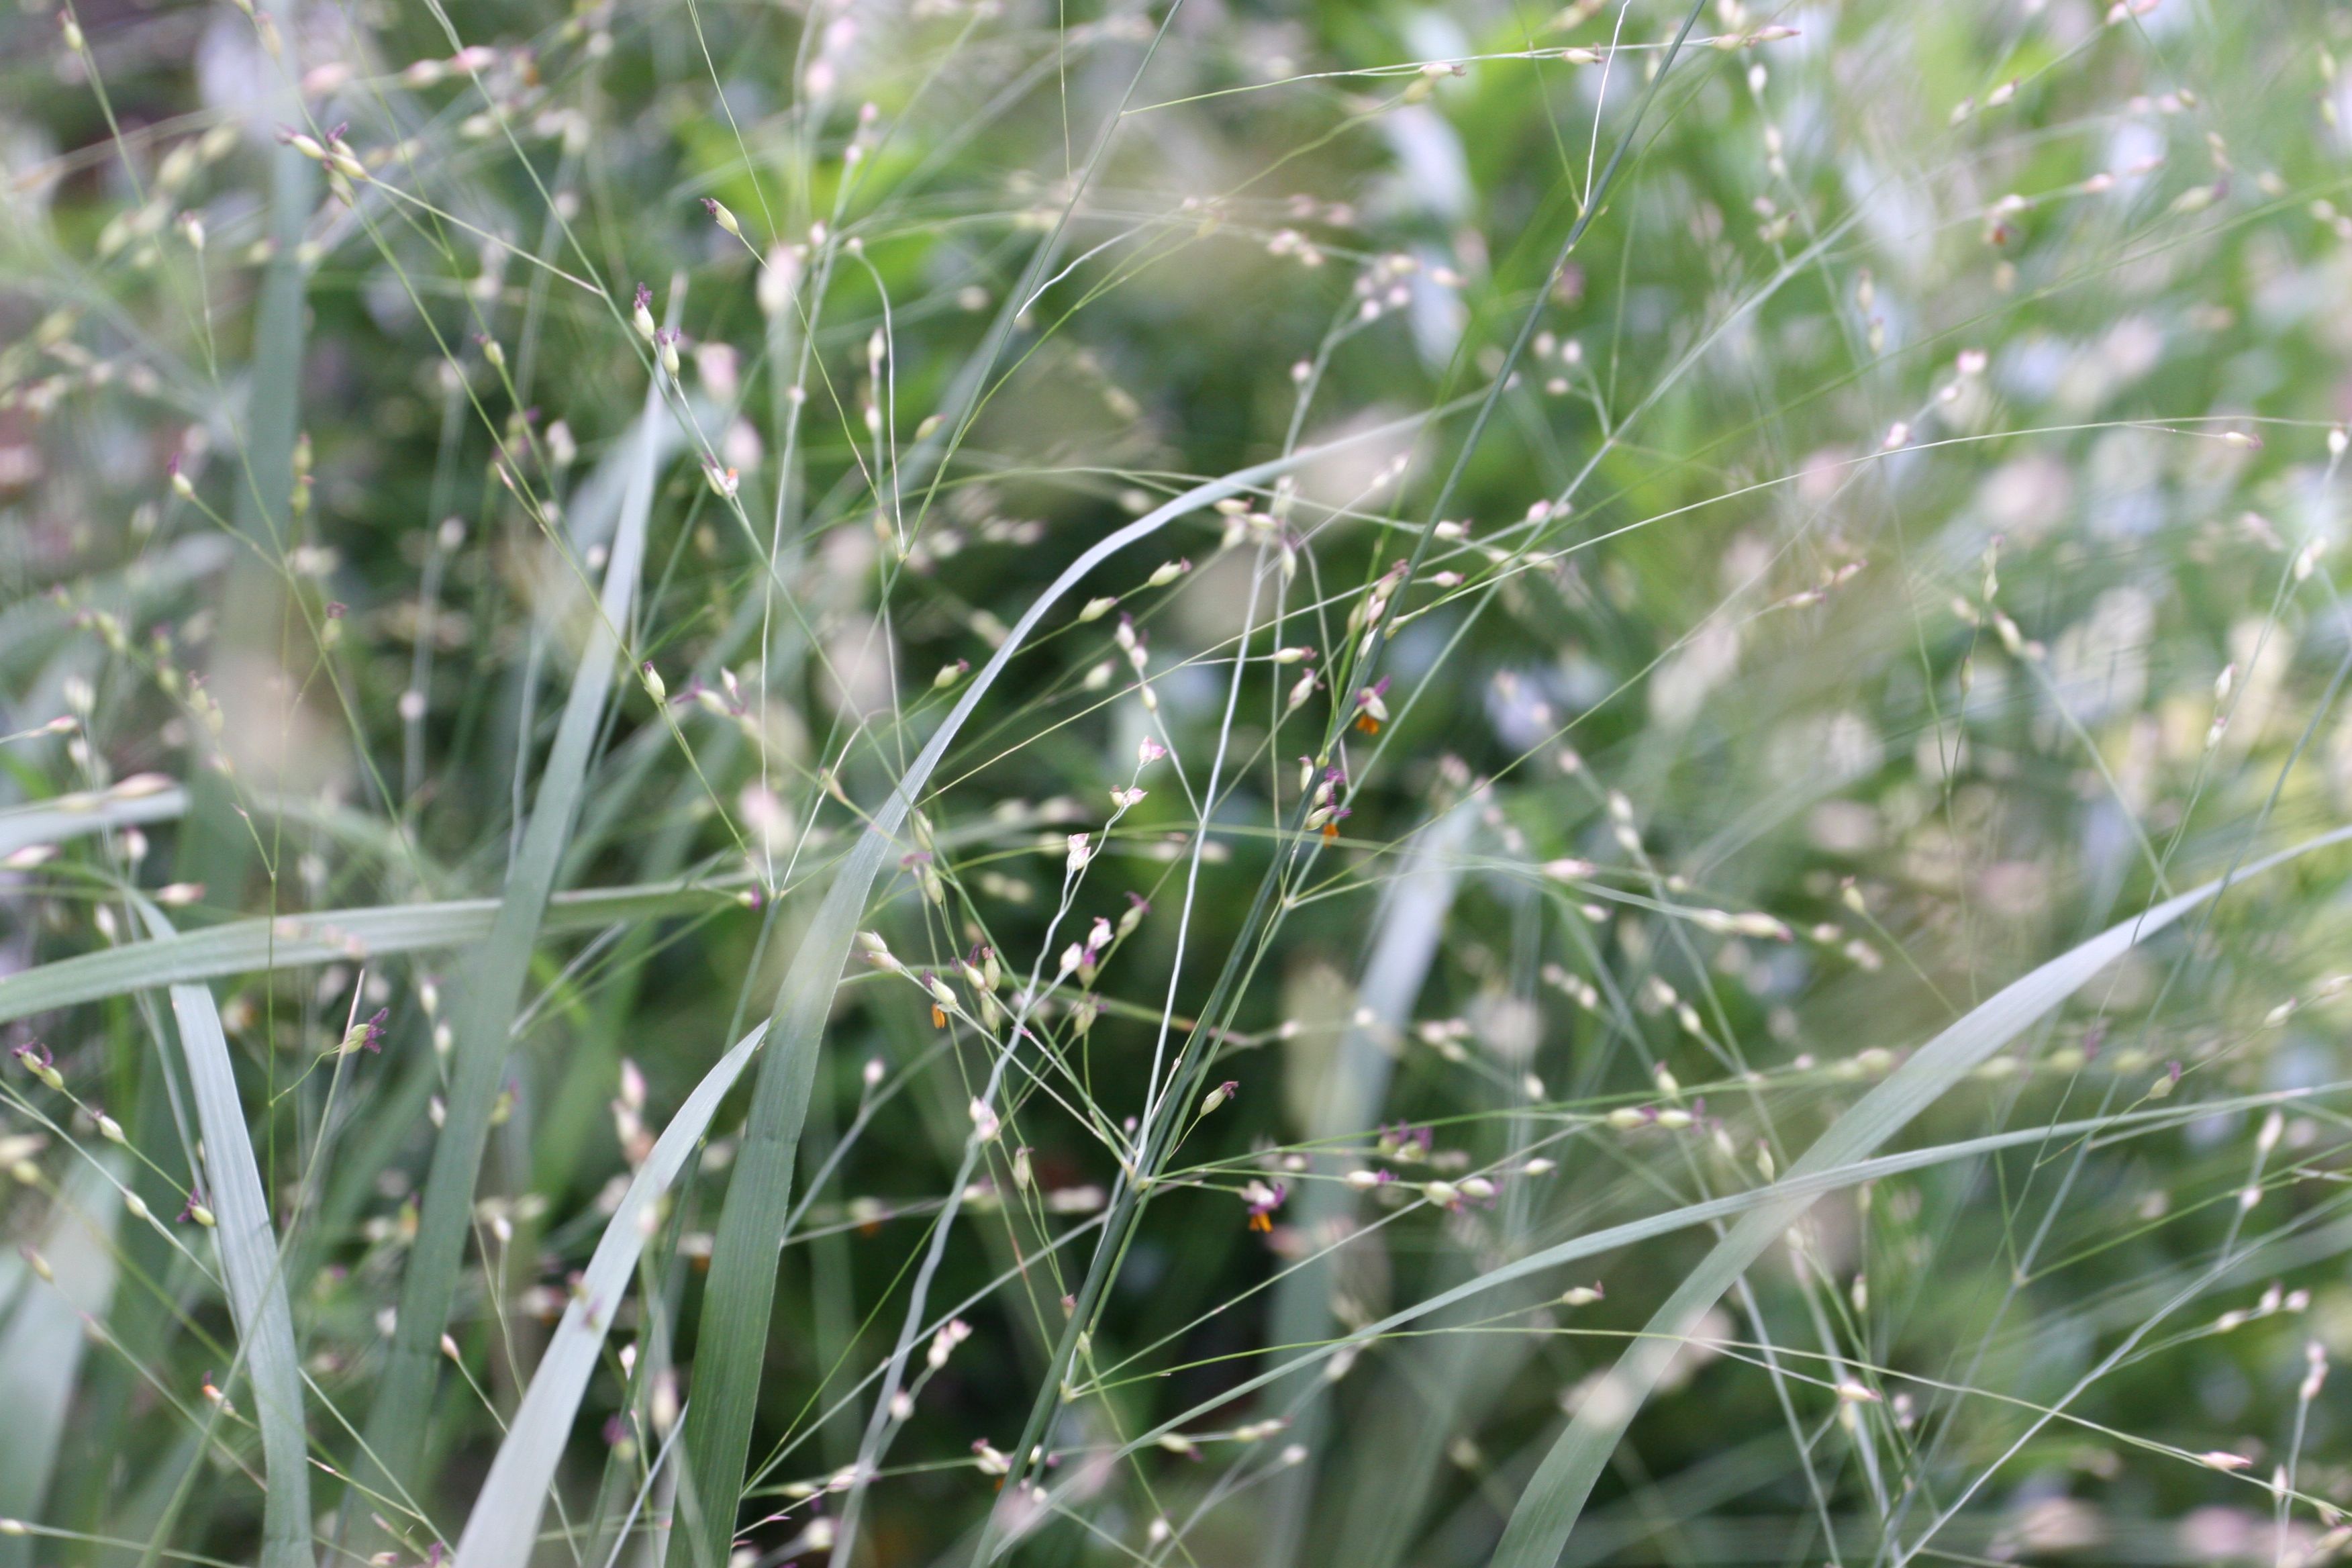 Beauty shot: the grasses in full-bloom. They tickle my eyes.